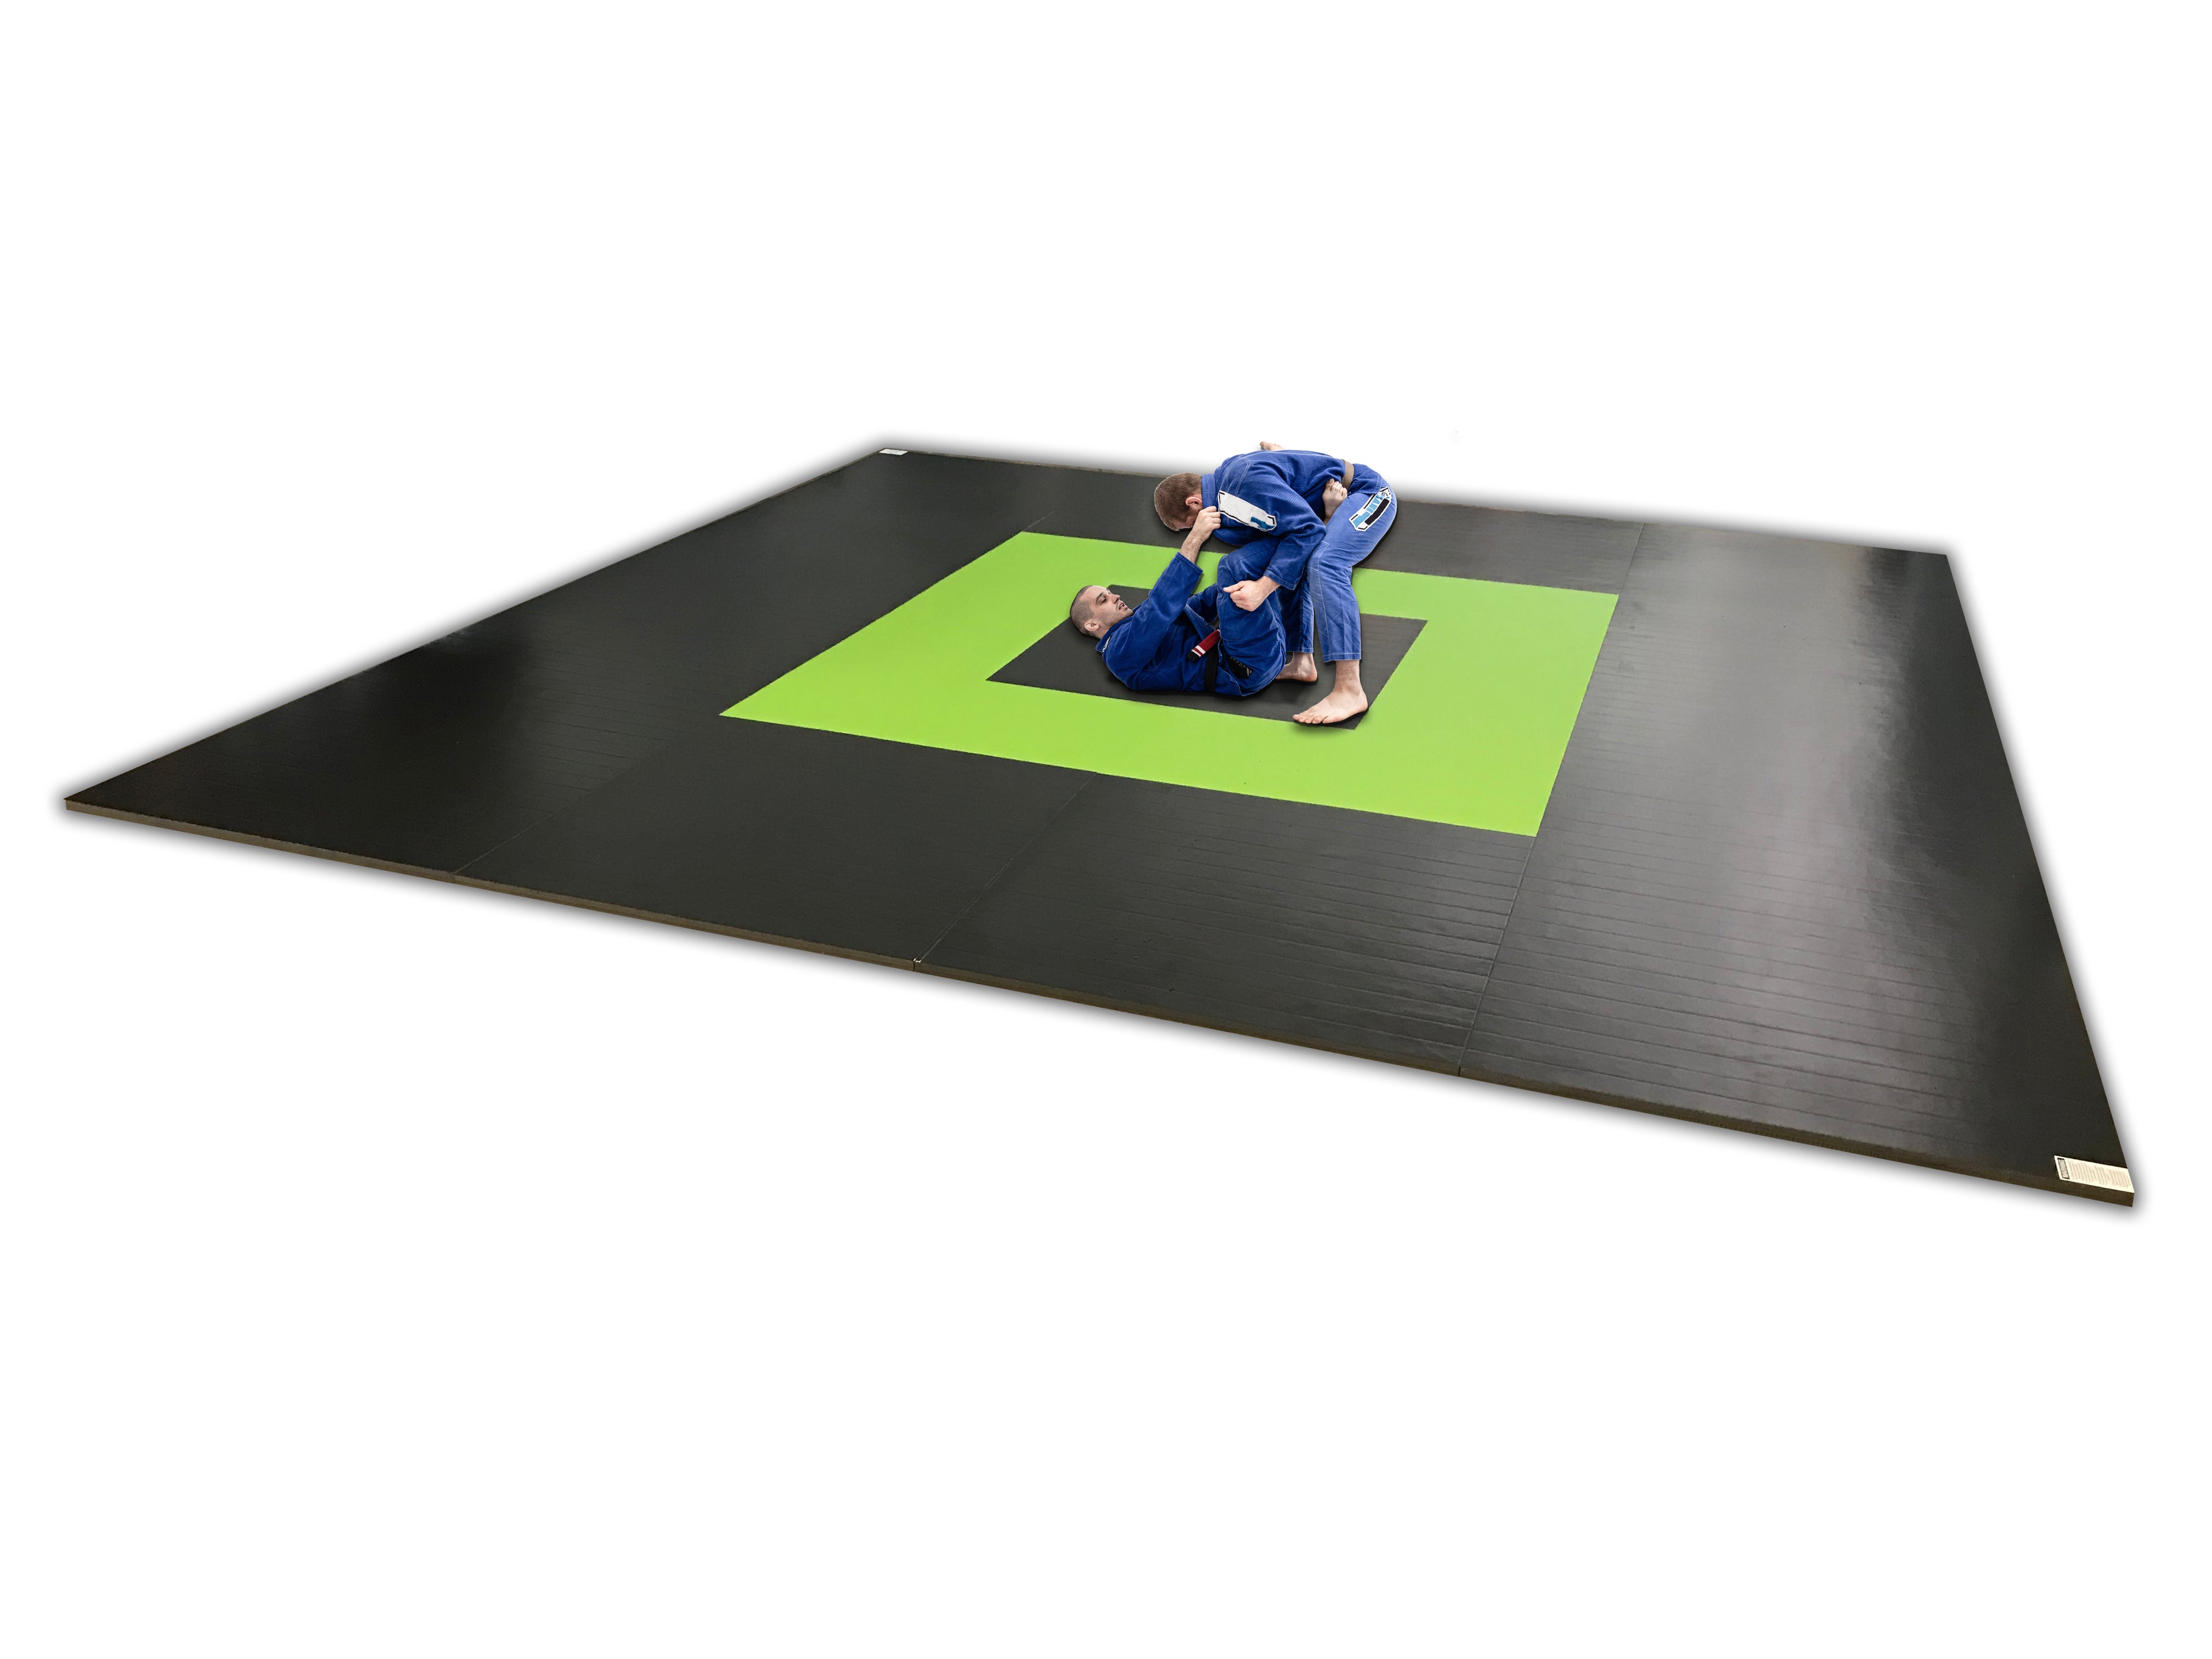 Martial Arts Digitally Printed 20' x 20' x 1 3/8" Roll-Up Competition Flooring